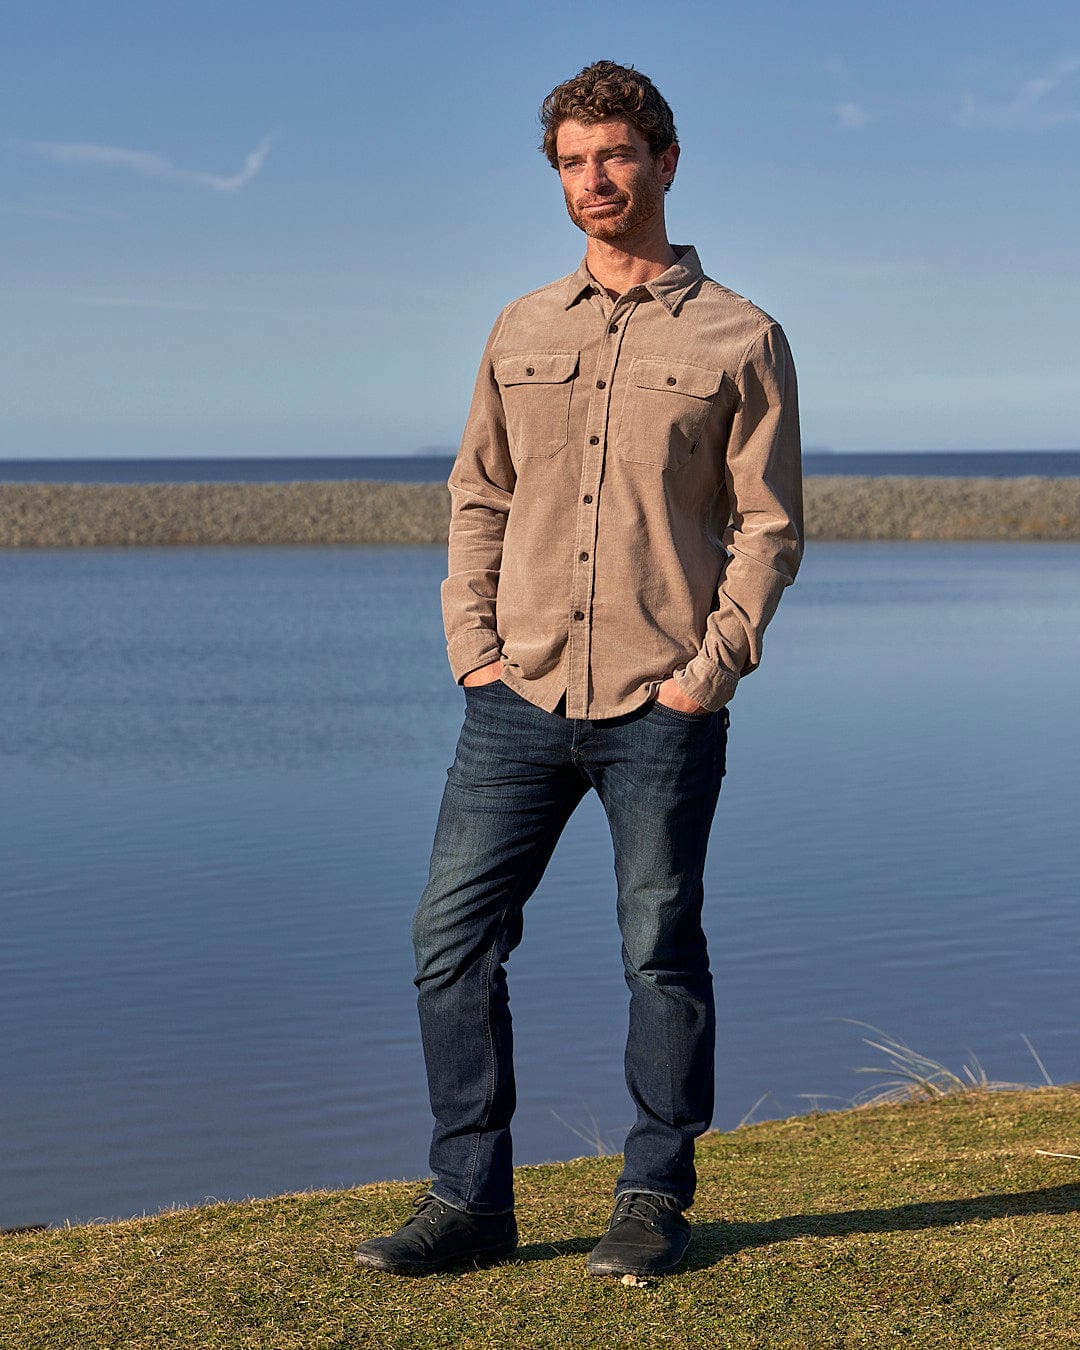 A man standing in front of a body of water wearing the Saltrock Ace - Men Corduroy Shirt in Light Brown.